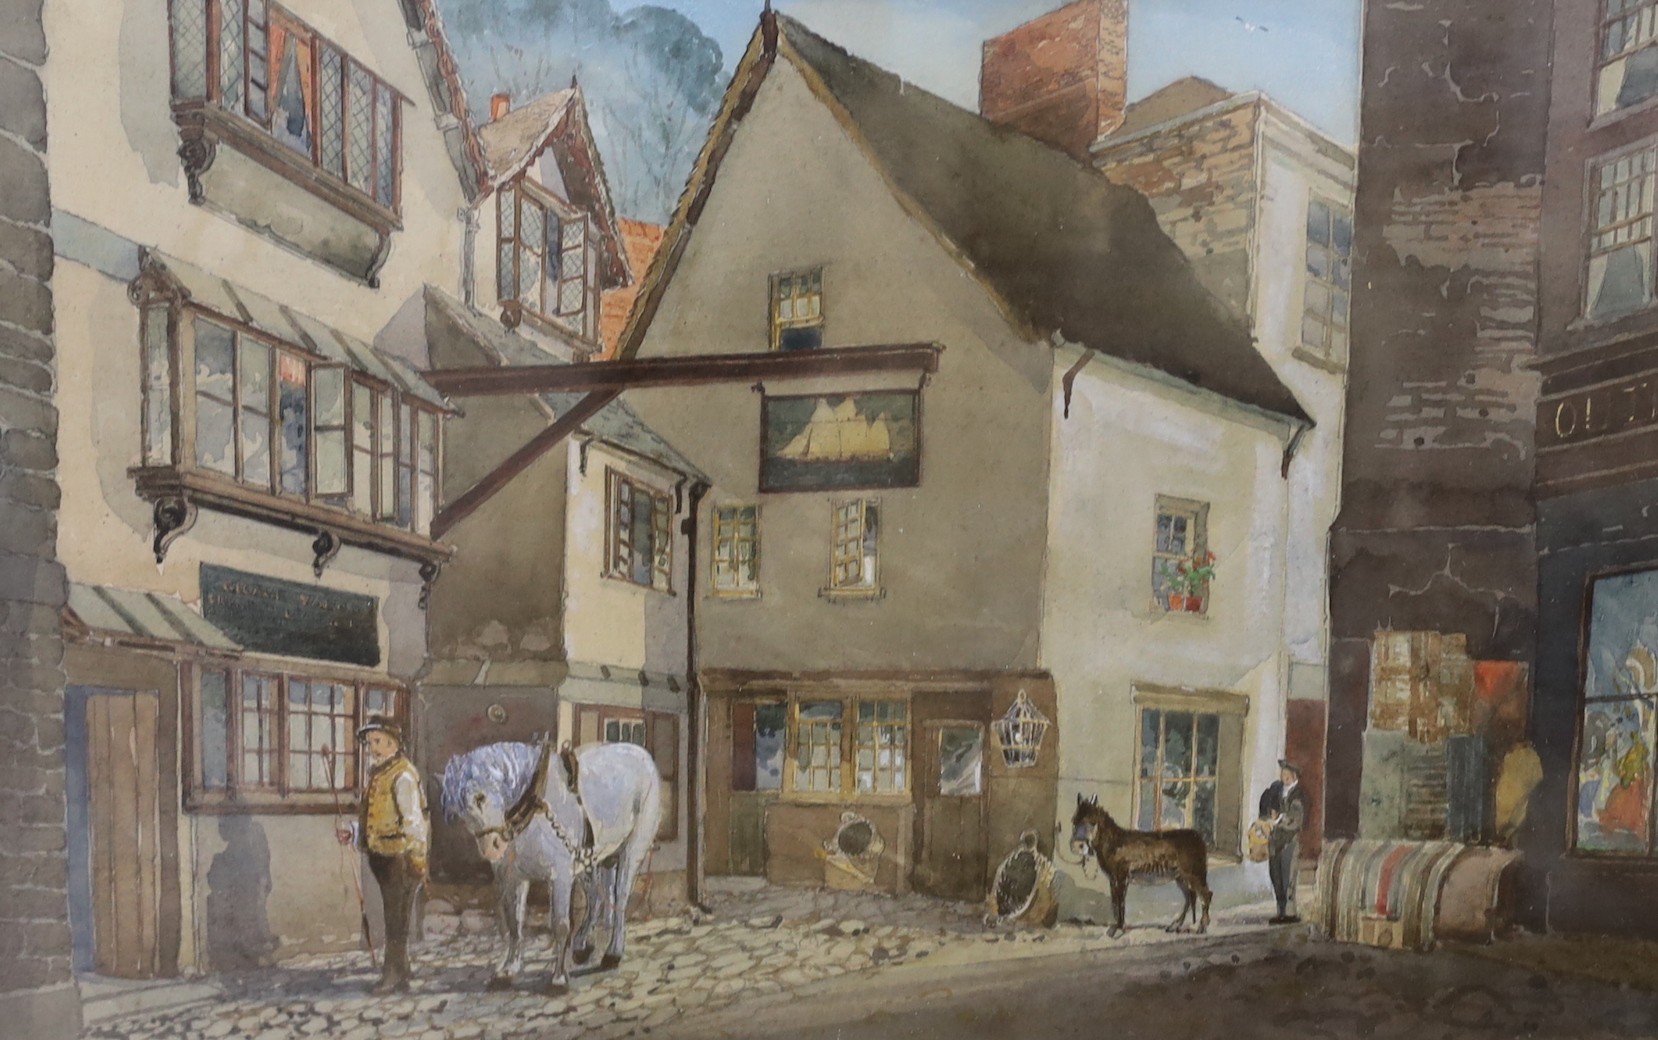 Pilfold Fletcher Watson (1842-1907), two watercolours, 'Fowey Church' and 'The Cutter Tavern', signed, 26 x 45cm and 24 x 40cm